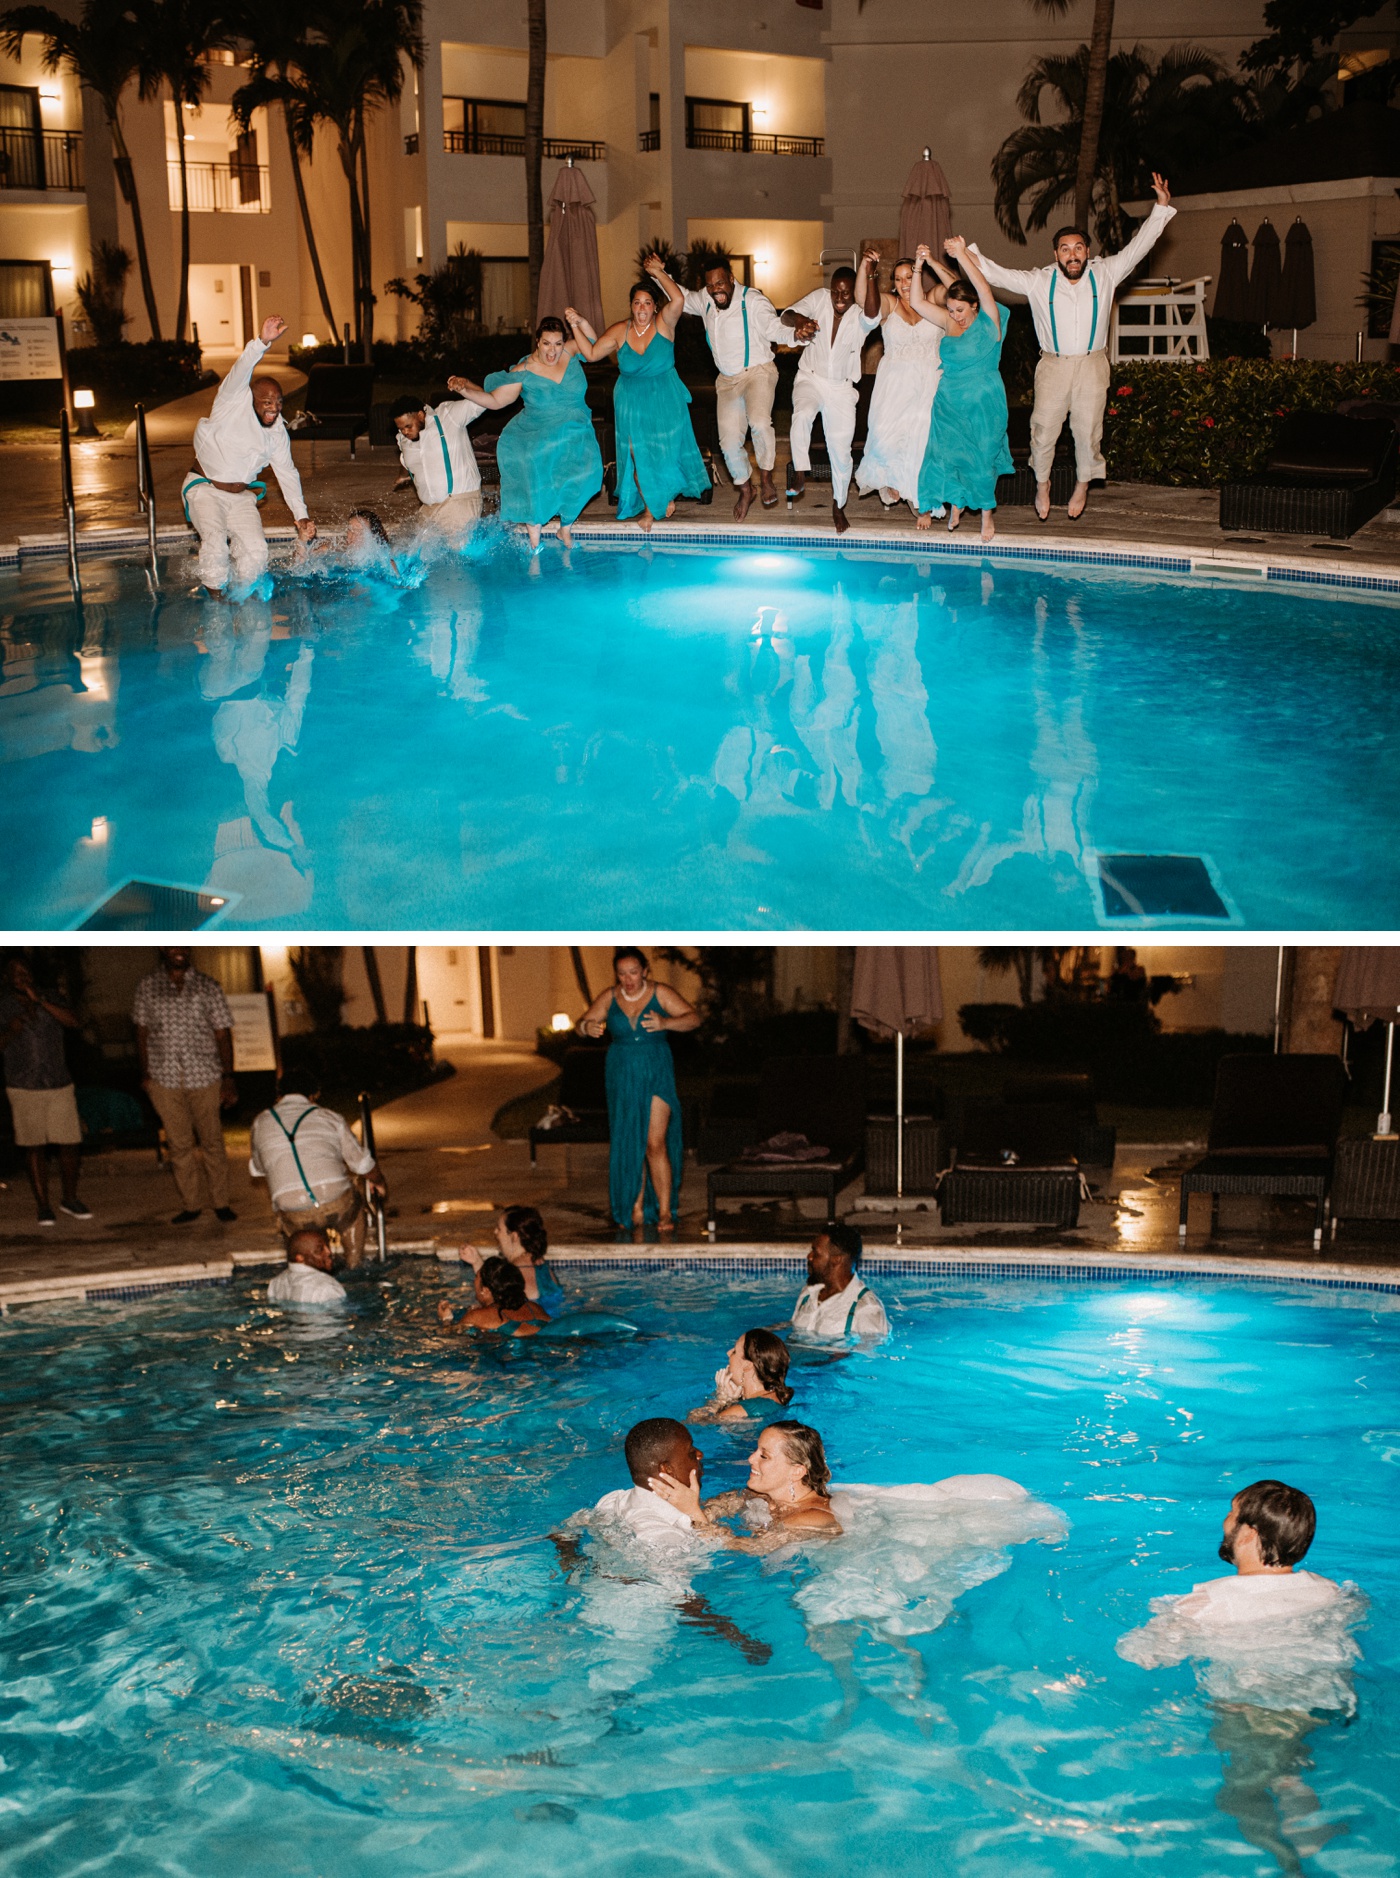 Bride and groom jumping in the pool with their bridal party after their wedding reception